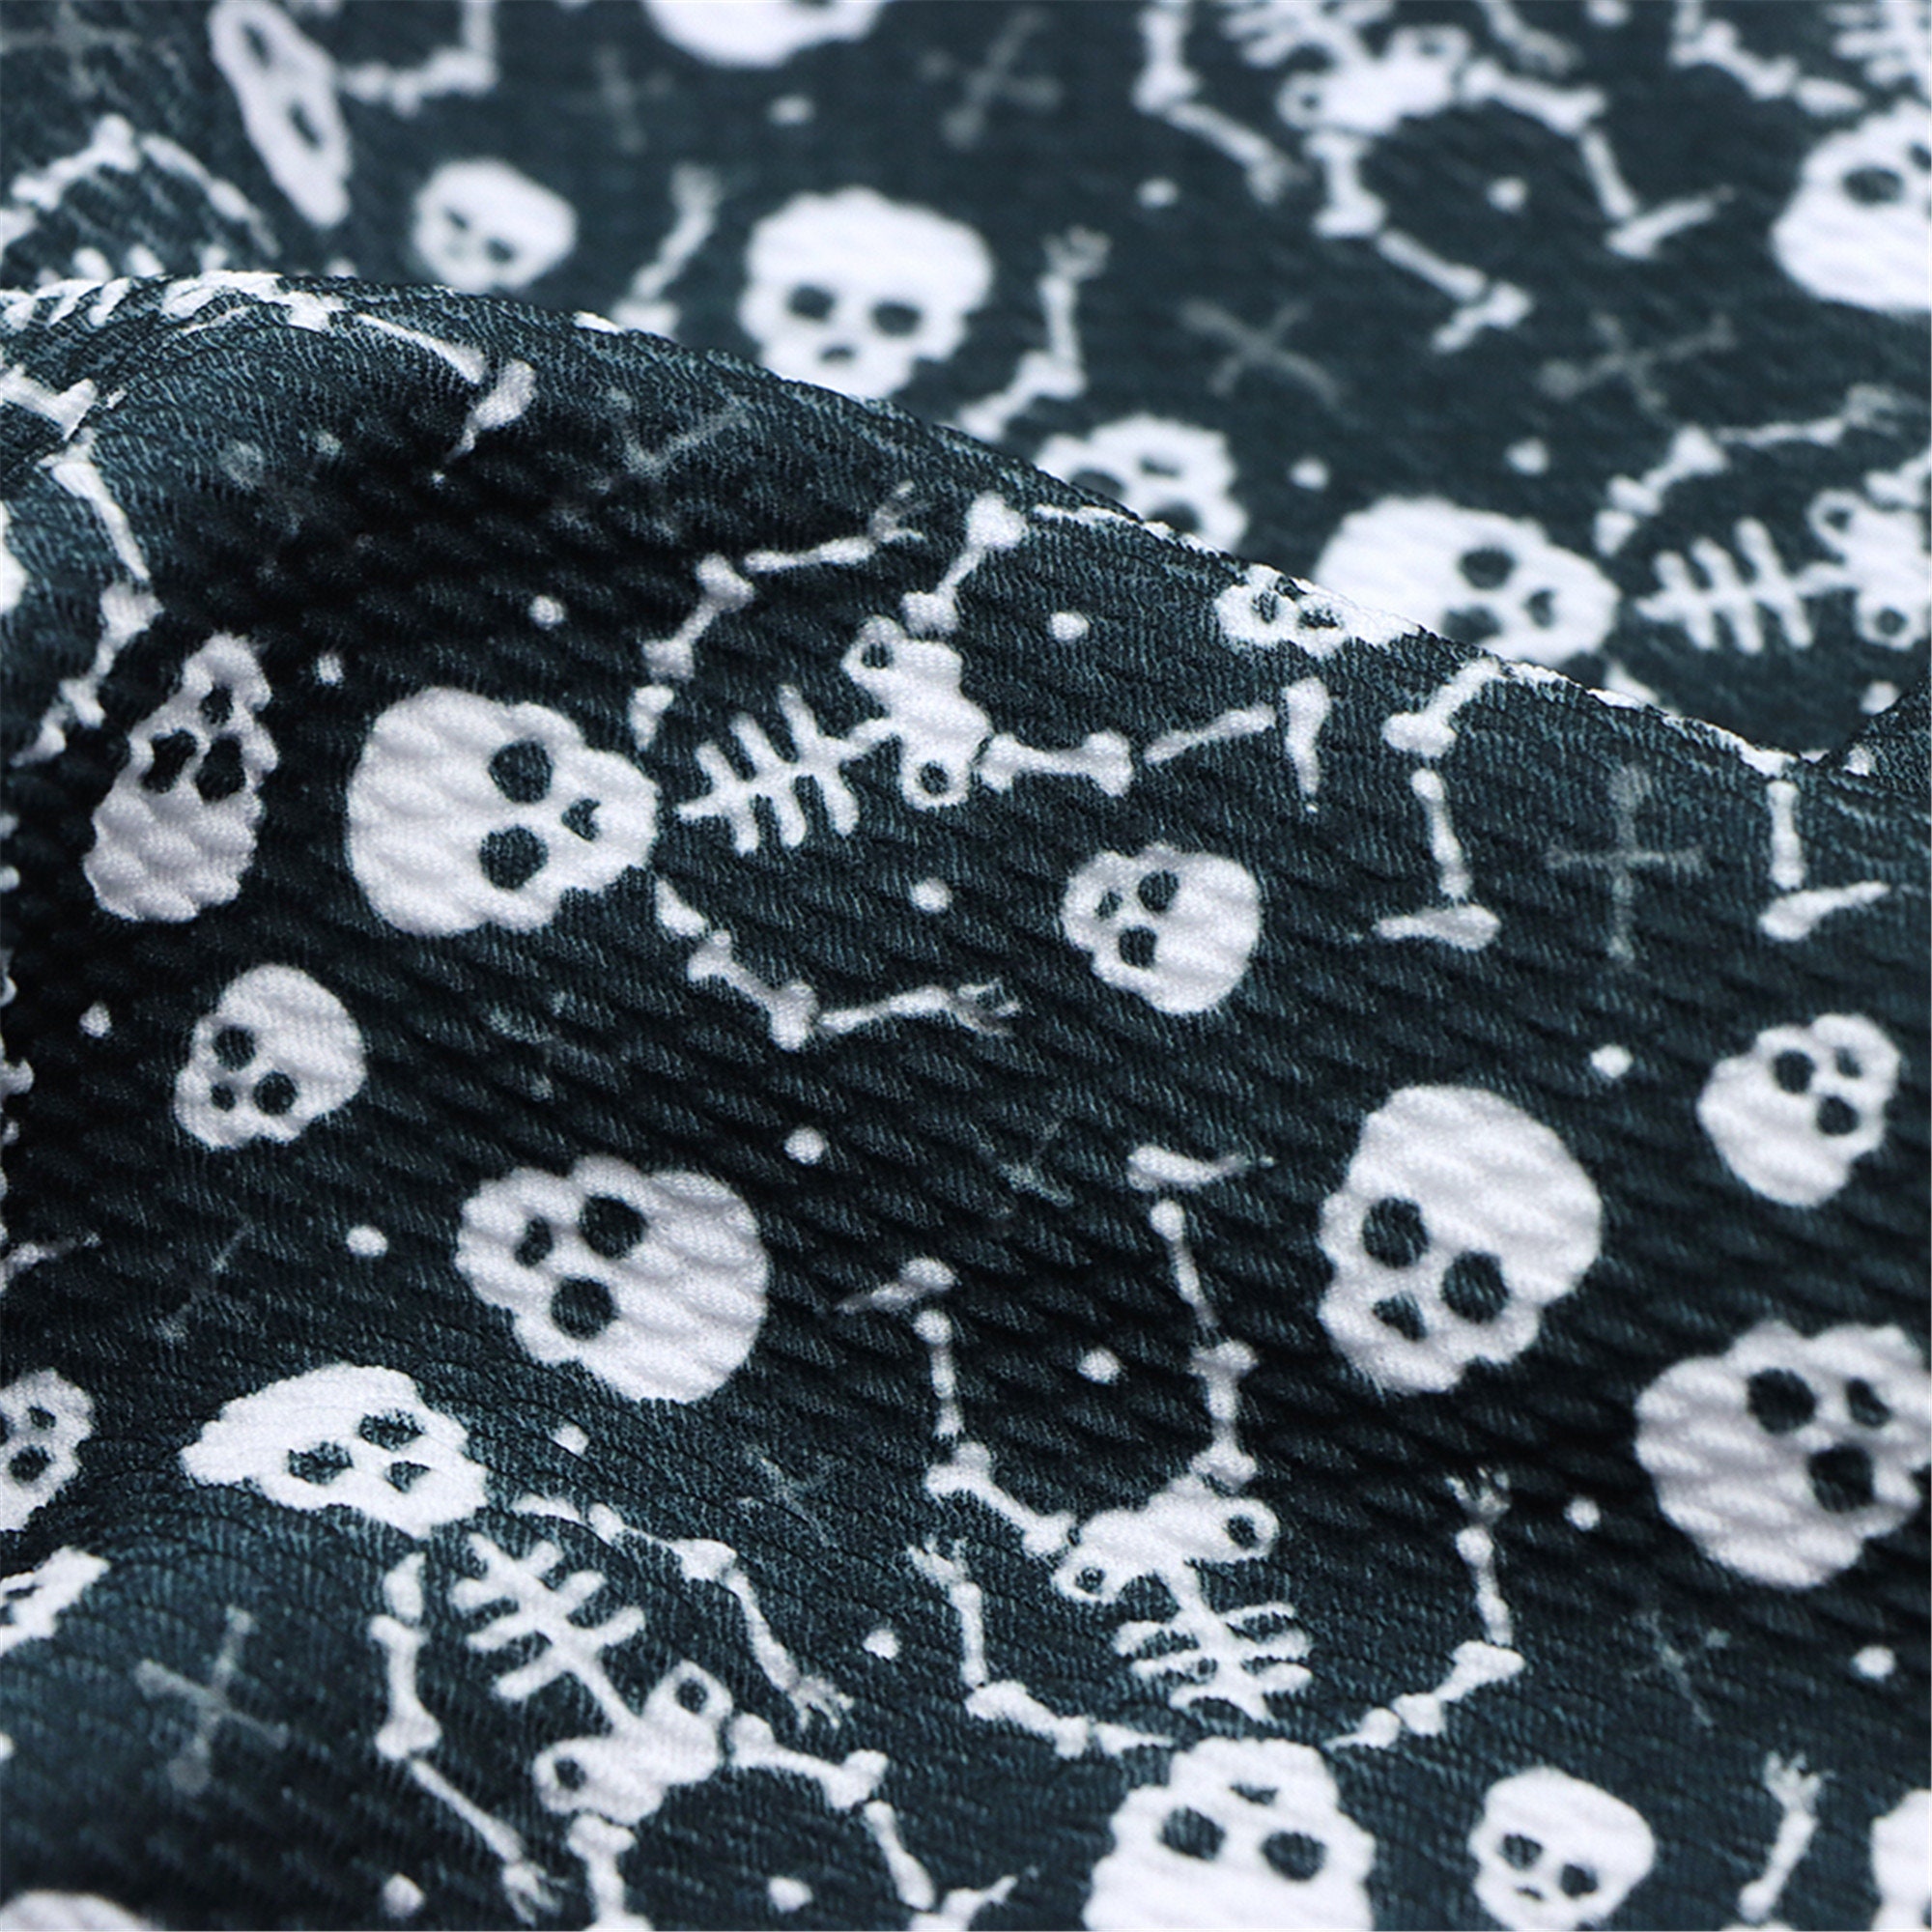 Skeleton Print Liverpool Bullet Textured Stretch Knit Fabric | Etsy